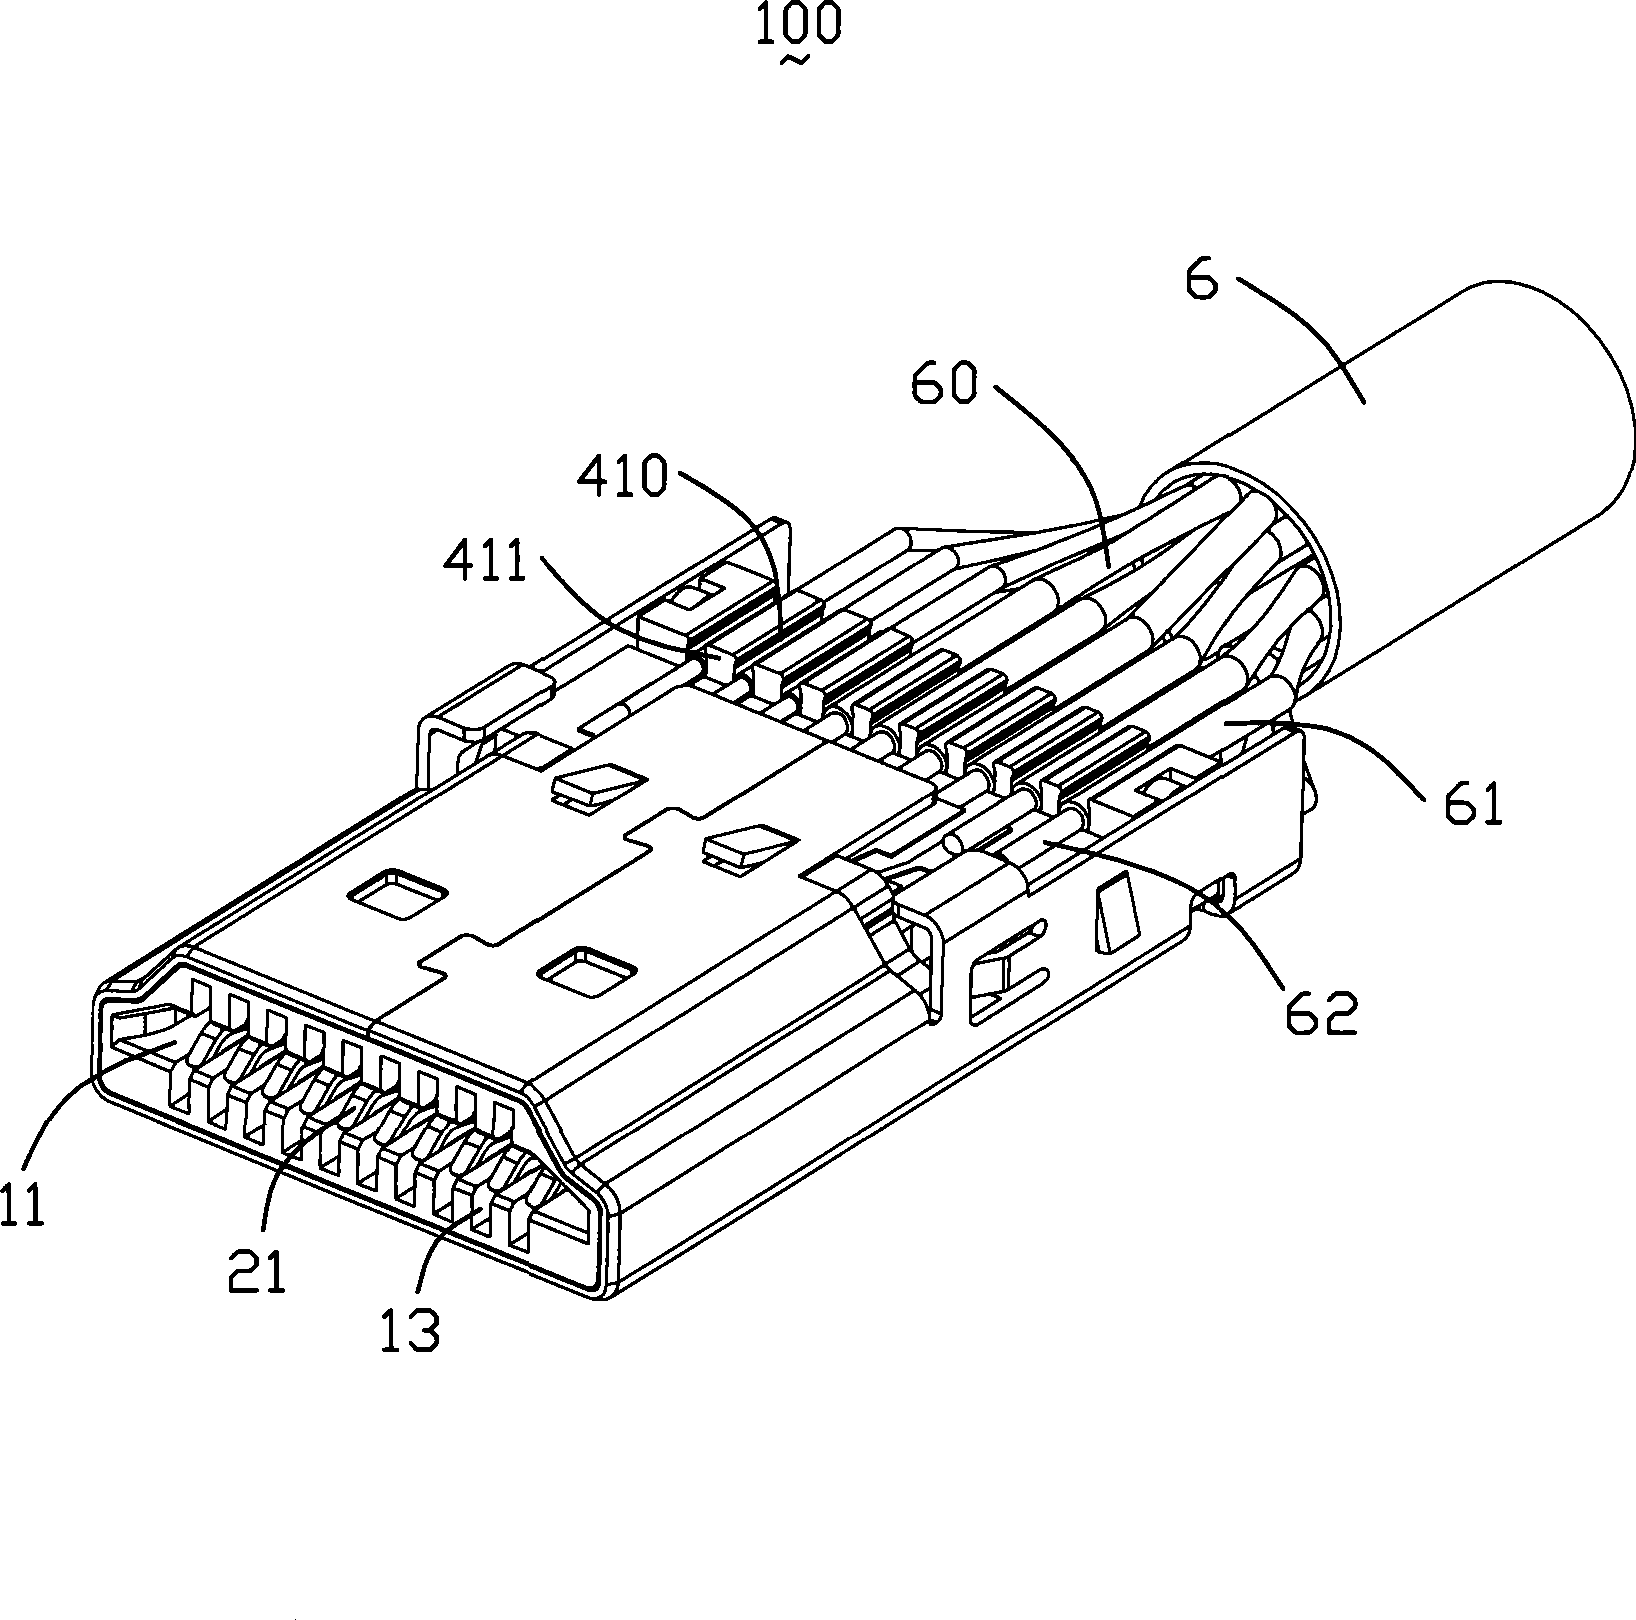 Cable connector assembly and method of making same